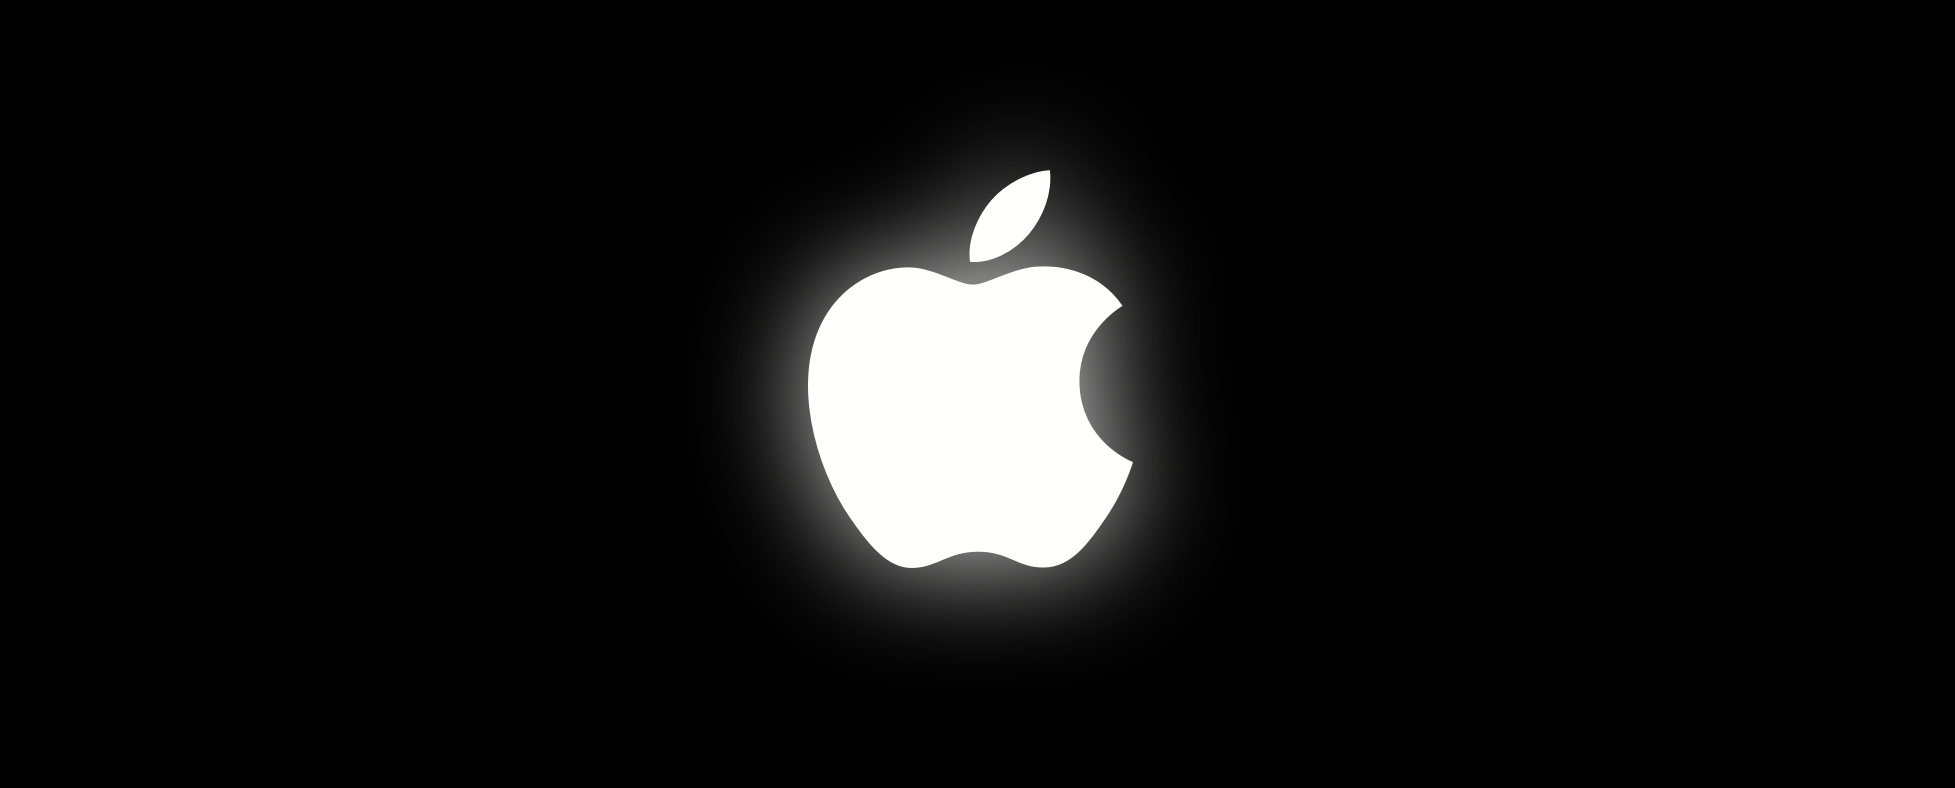 An image showing a slightly glowing whit Apple logo set against a dark background